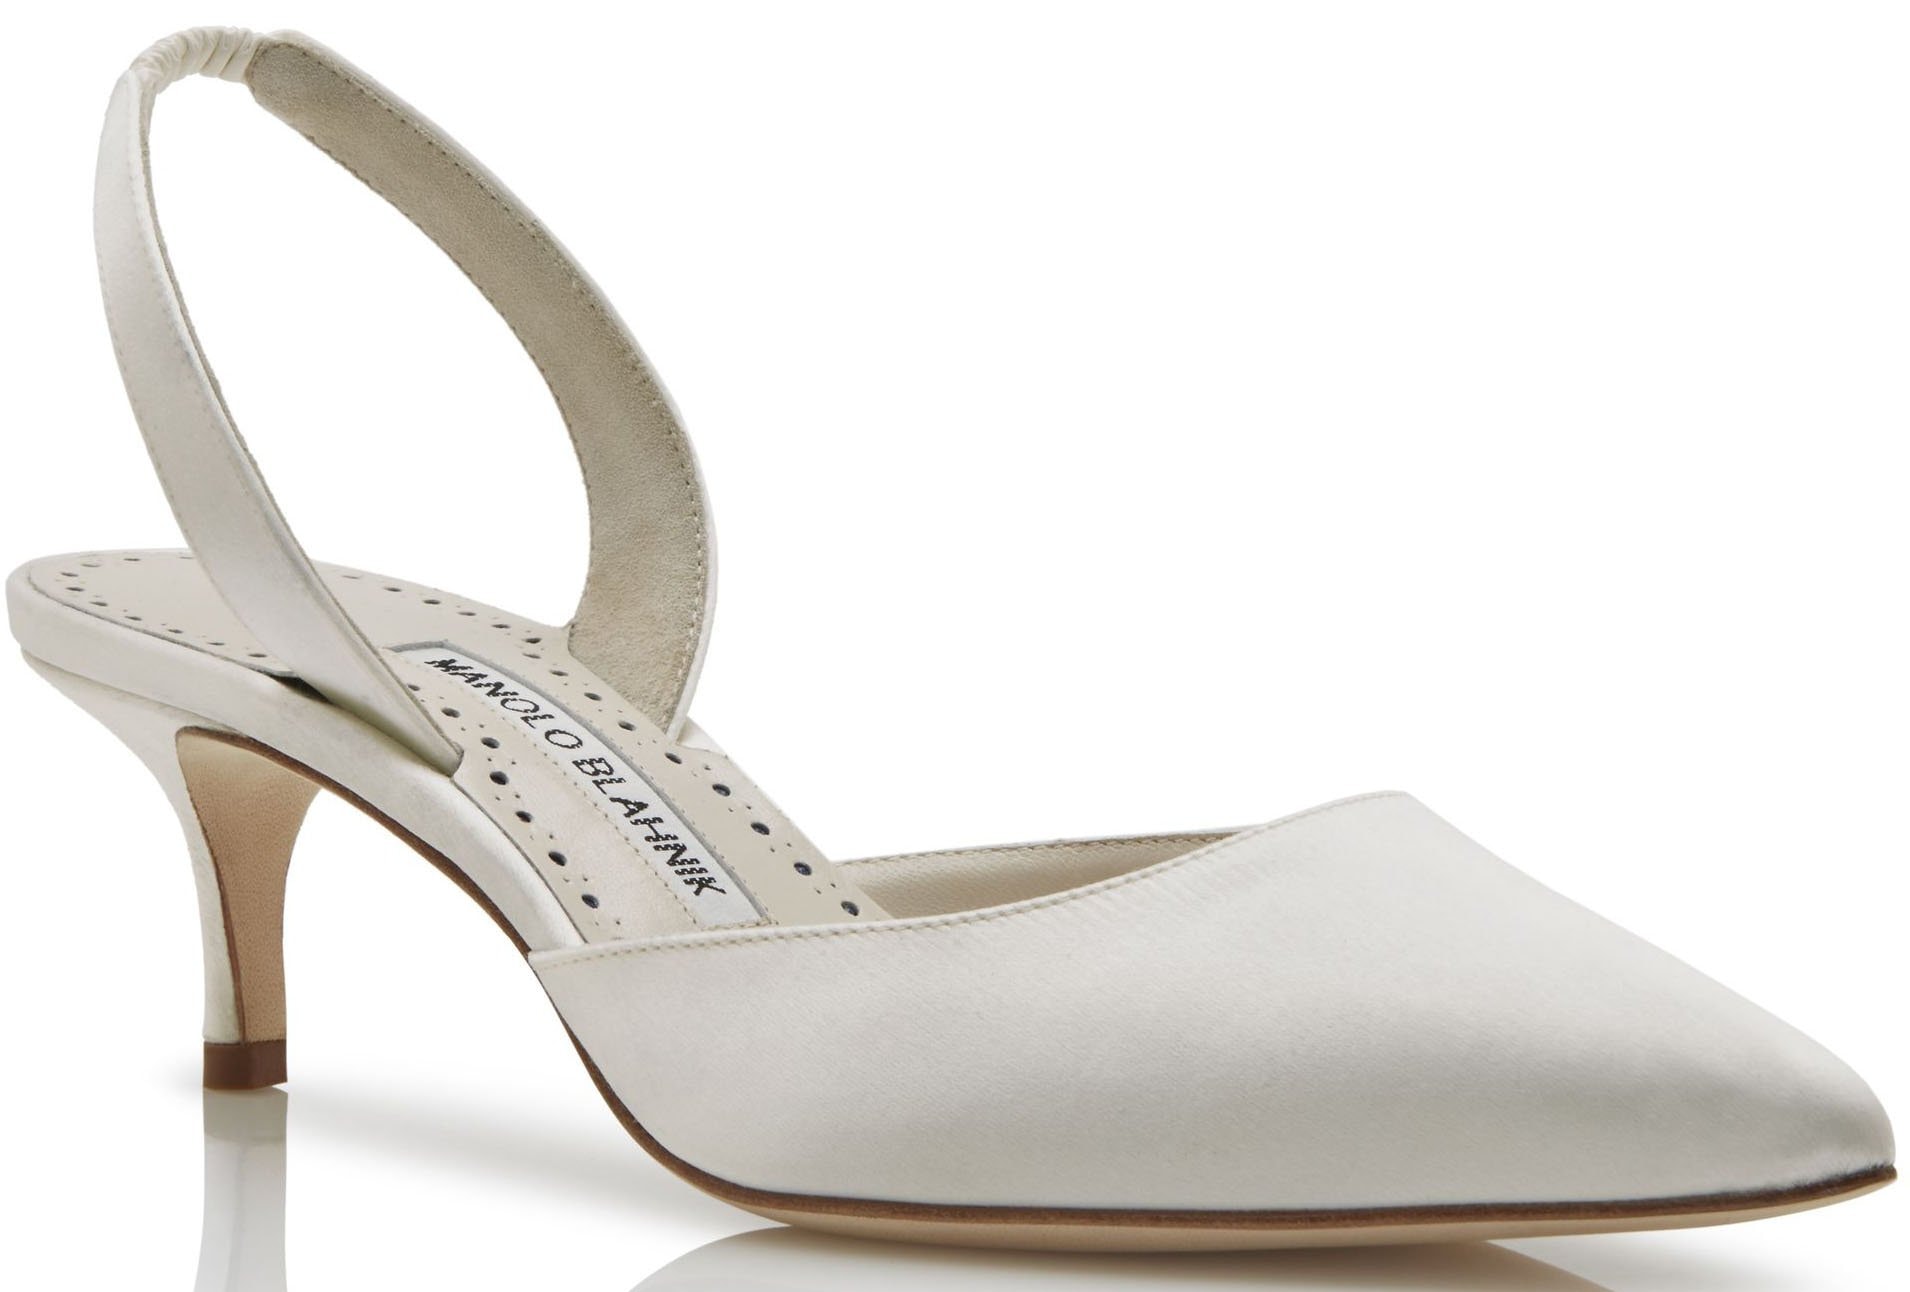 Simple but elegant, these white satin pumps from Manolo Blahnik will look perfect with just about any type of wedding dress